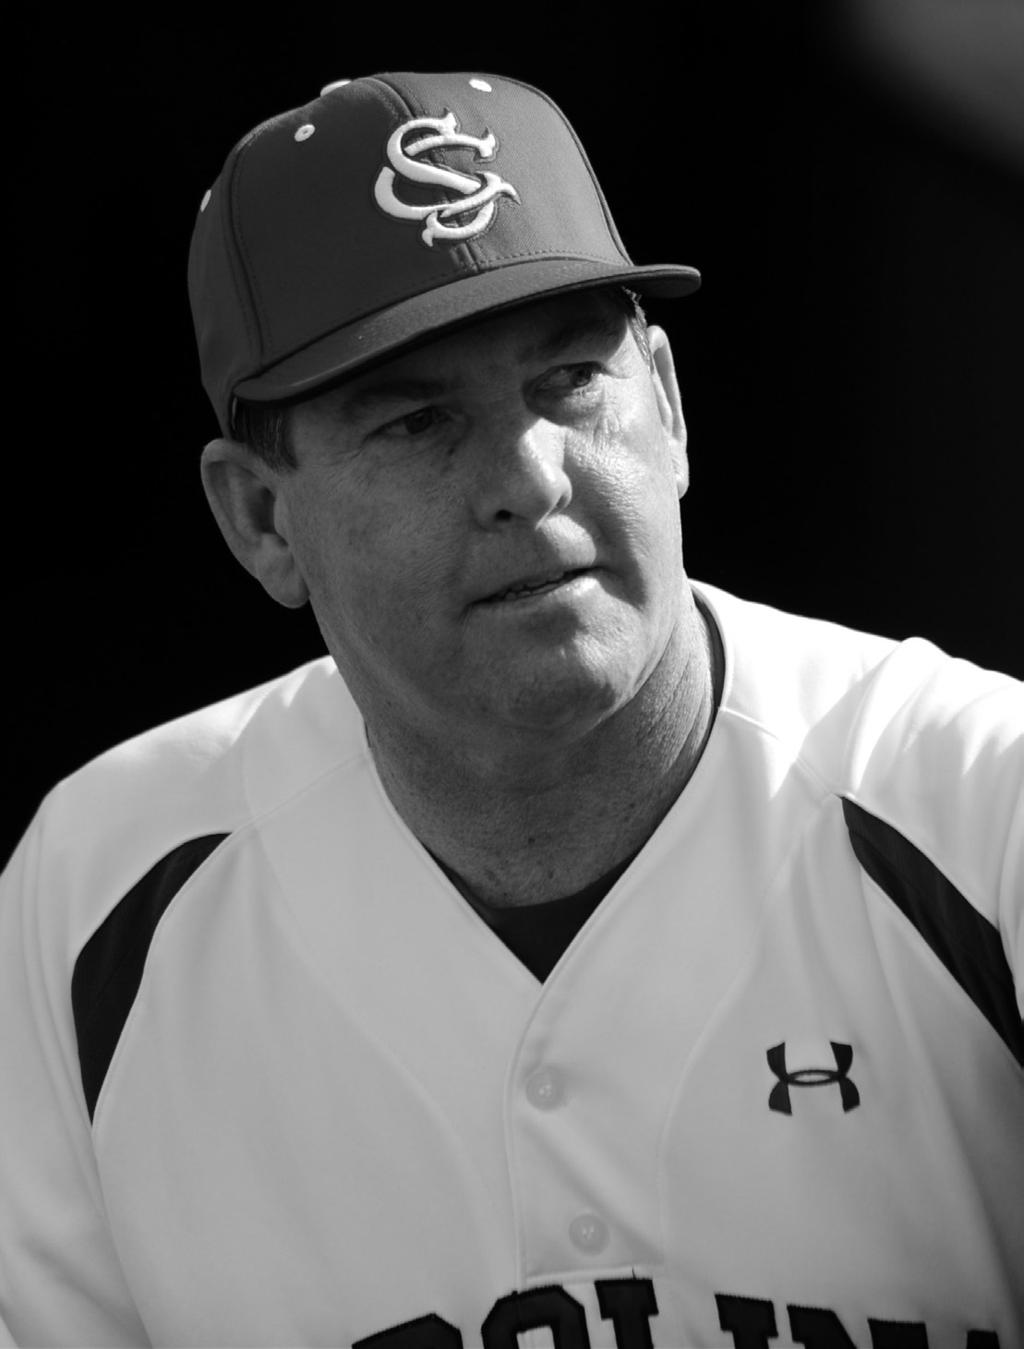 2011 South Carolina Baseball 1 Ray TANNER Head Coach 15th Season at South Carolina 24th Season Overall Collegiate Baseball and Baseball America s National Coach of the Year, Ray Tanner is in his 15th